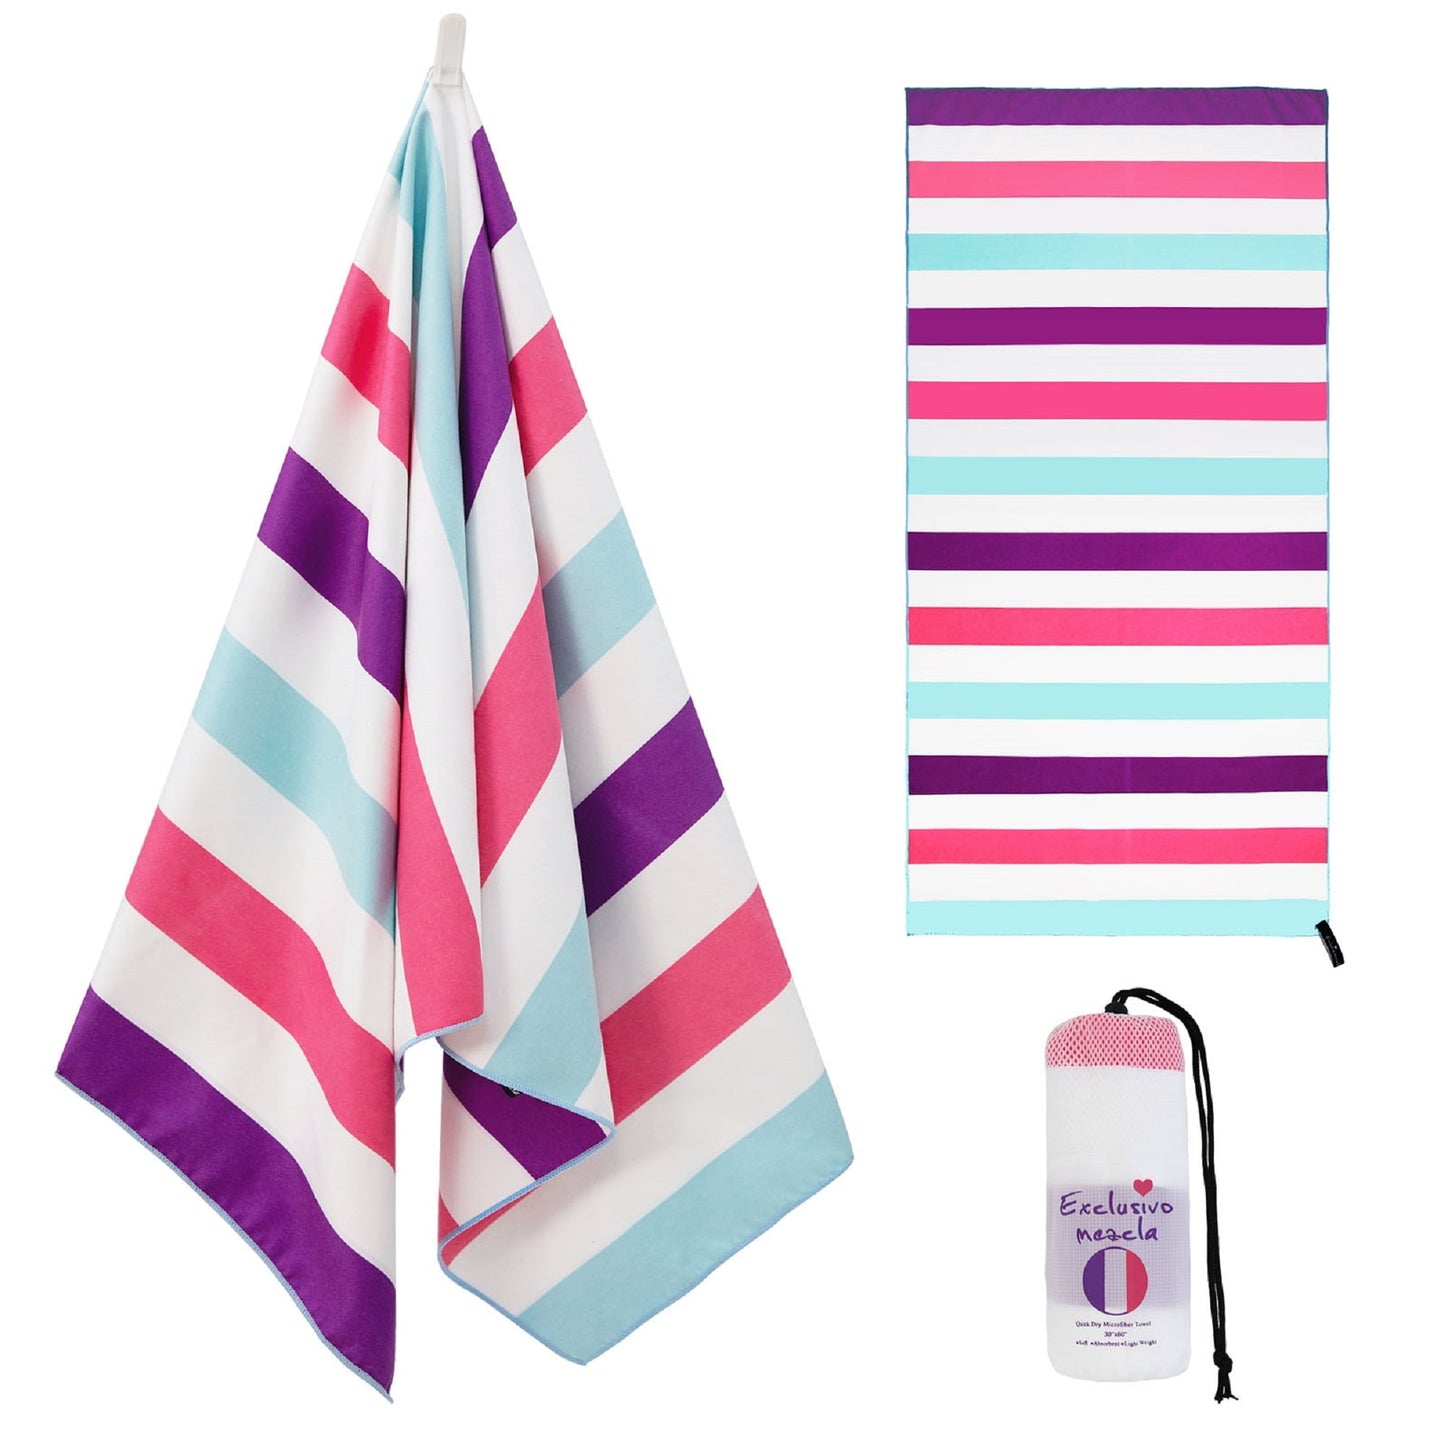 Exclusivo Mezcla Microfiber Quick Dry Beach Towel, Large Sand Free Beach Towel for Travel/ Camping/ Sports (Striped Pink, 30"X60") - Super Absorbent, Compact and Lightweight